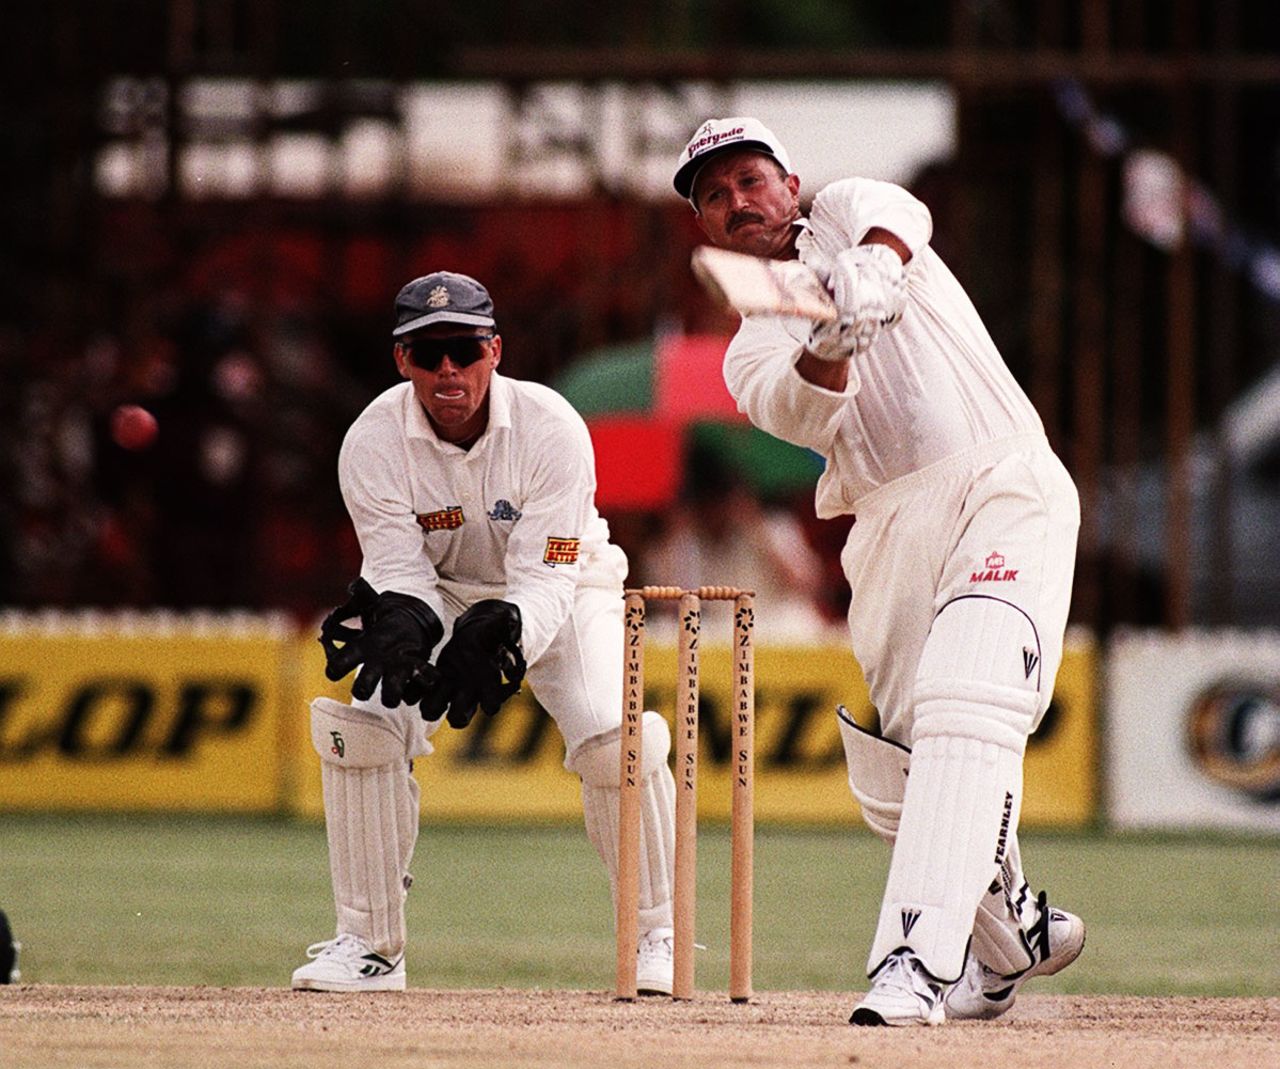 Dave Houghton bats against England, Harare, December 4, 1996